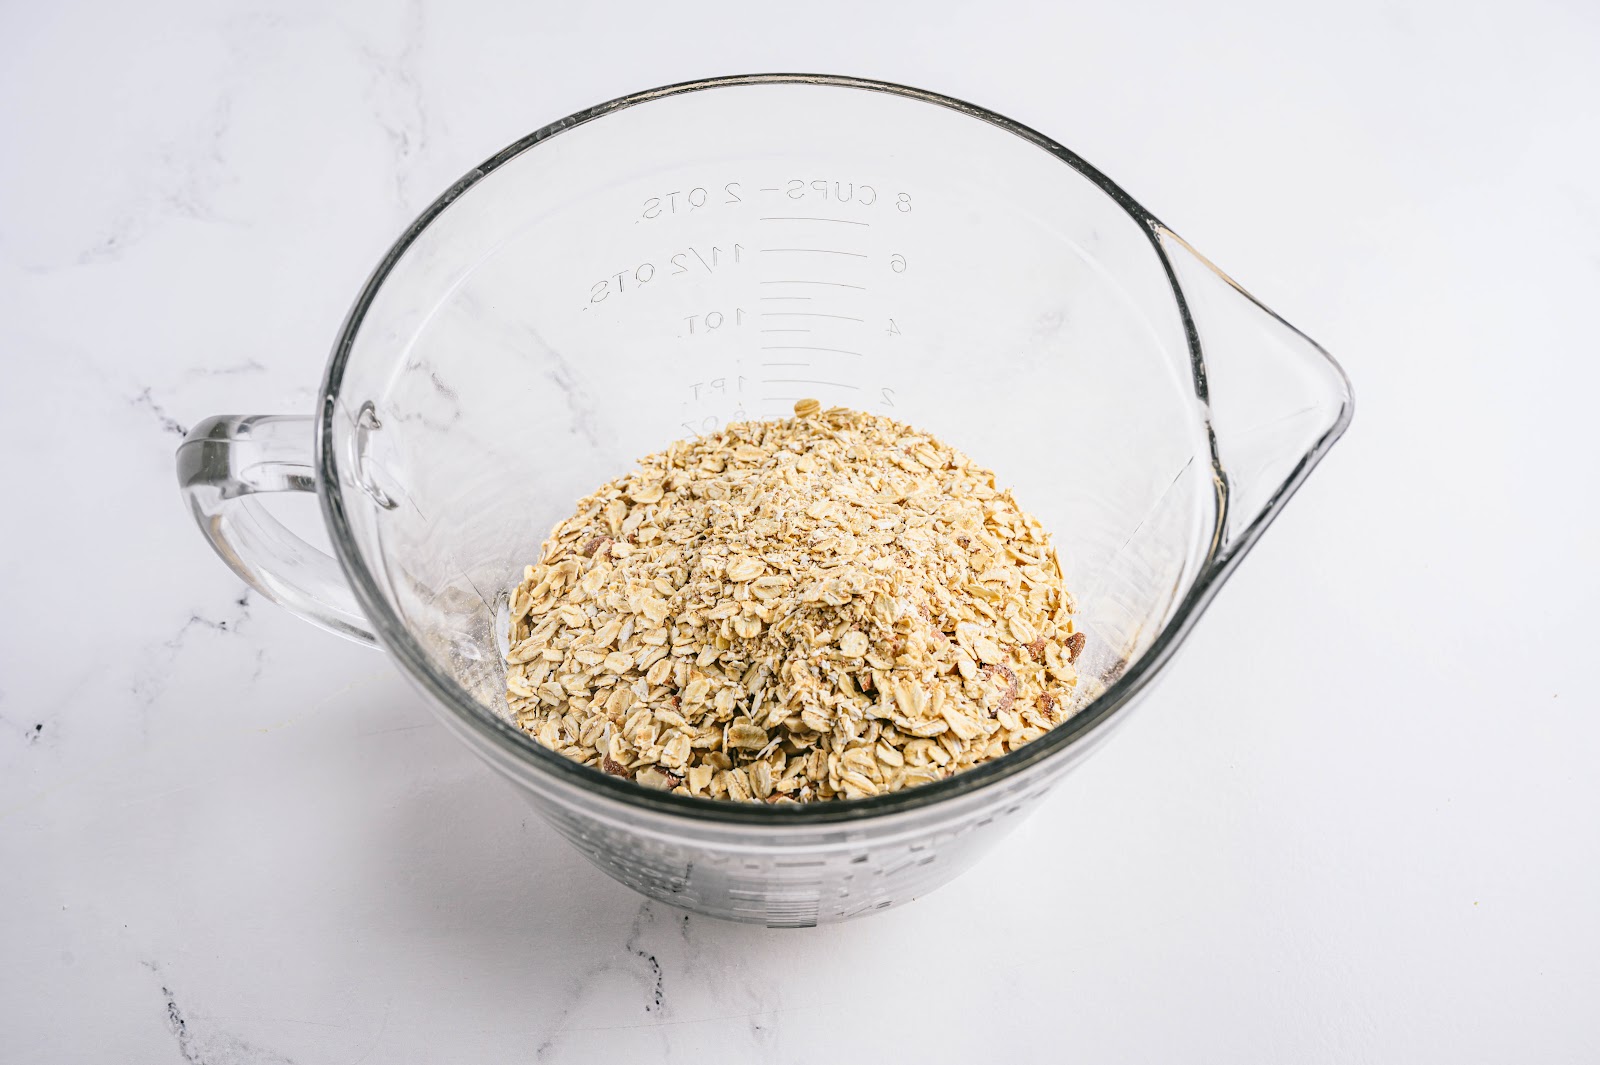 Transfer your granola to a large bowl and set it aside.
